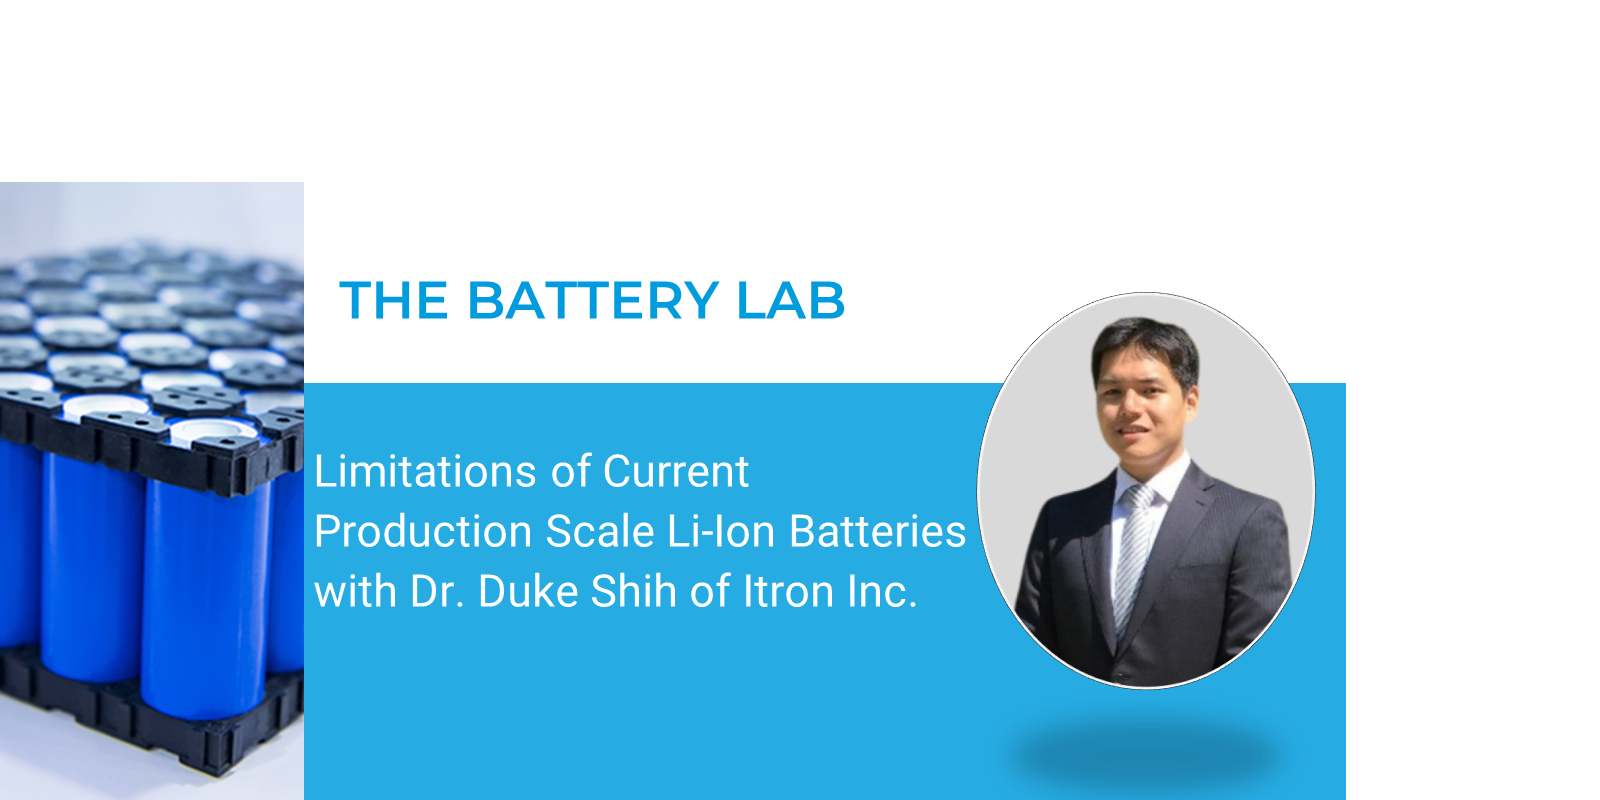 Limitations of Current Production Scale Lithium Ion Batteries with Dr. Duke Shih of Itron Inc.